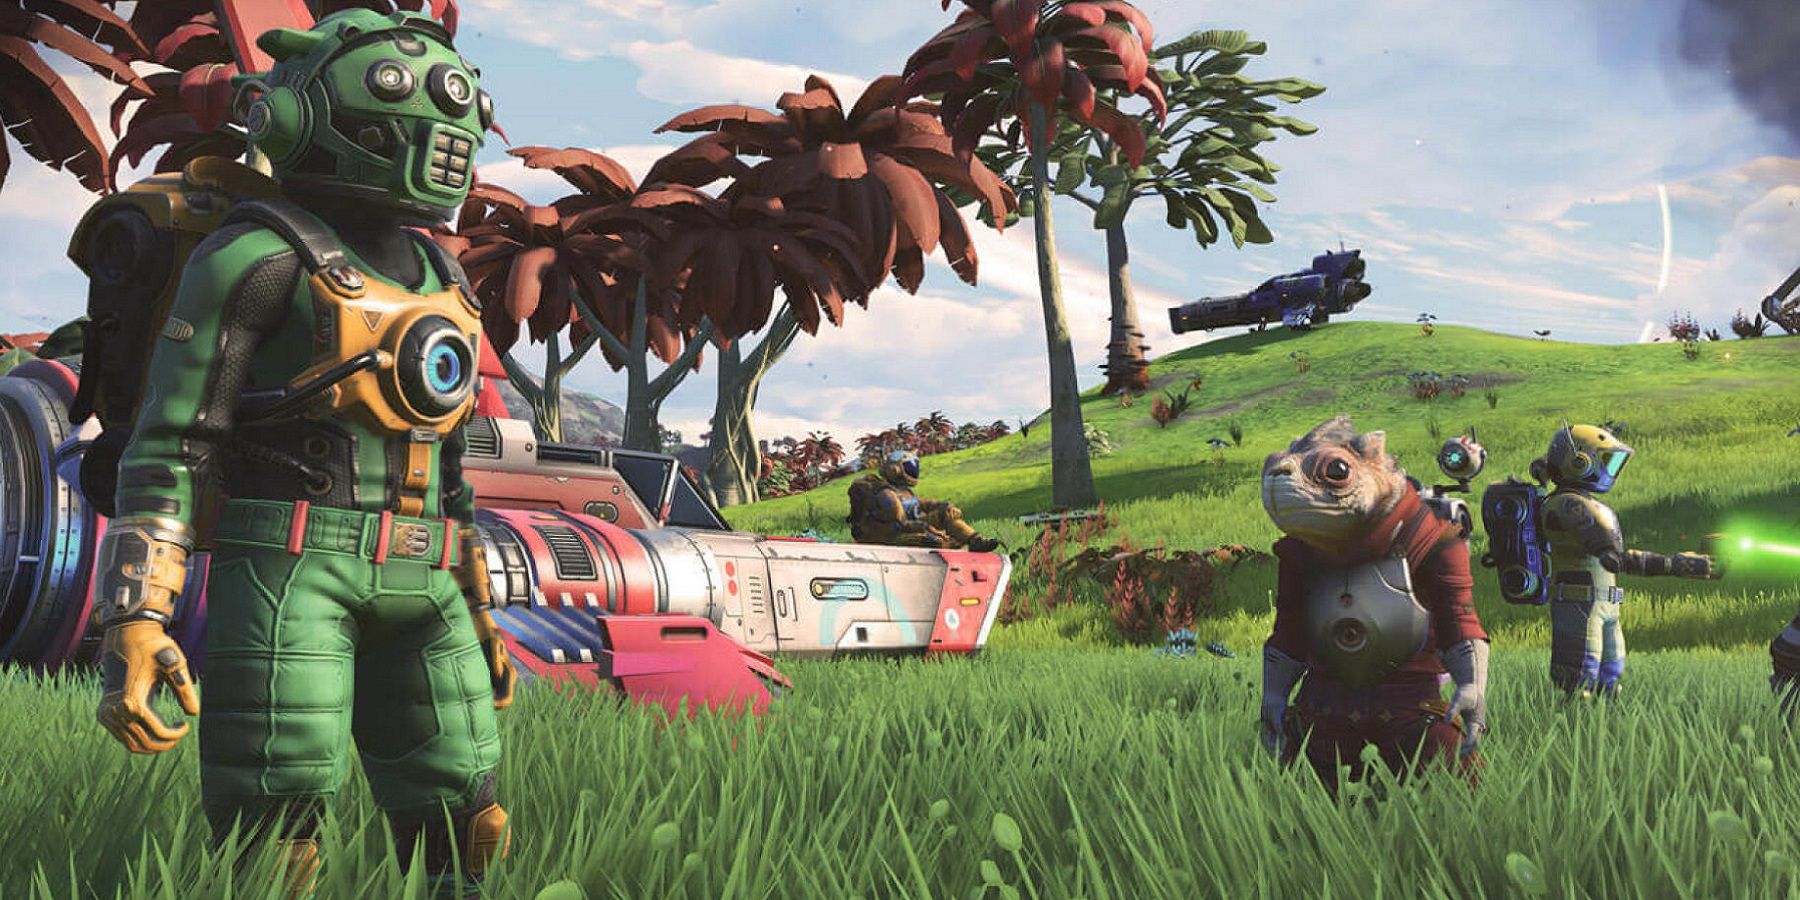 Image from No Man's Sky showing some Korvax and Gek on a nice green field.